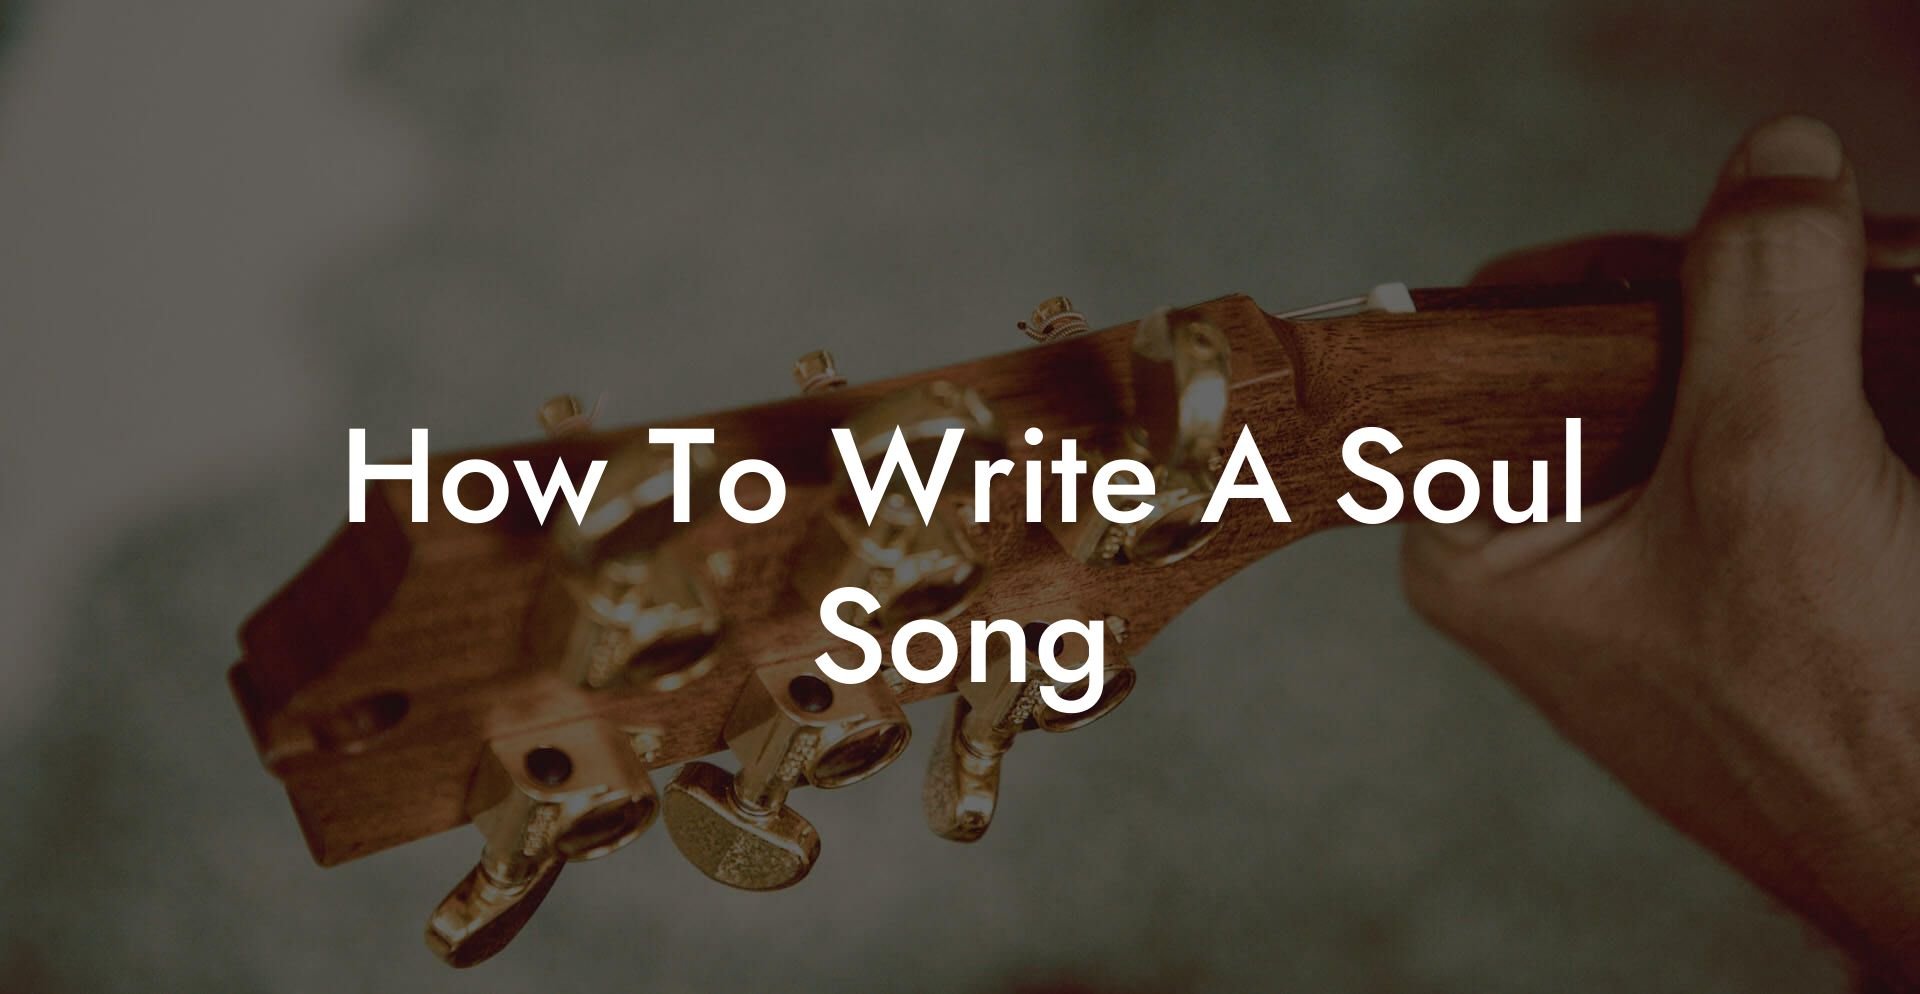 how to write a soul song lyric assistant